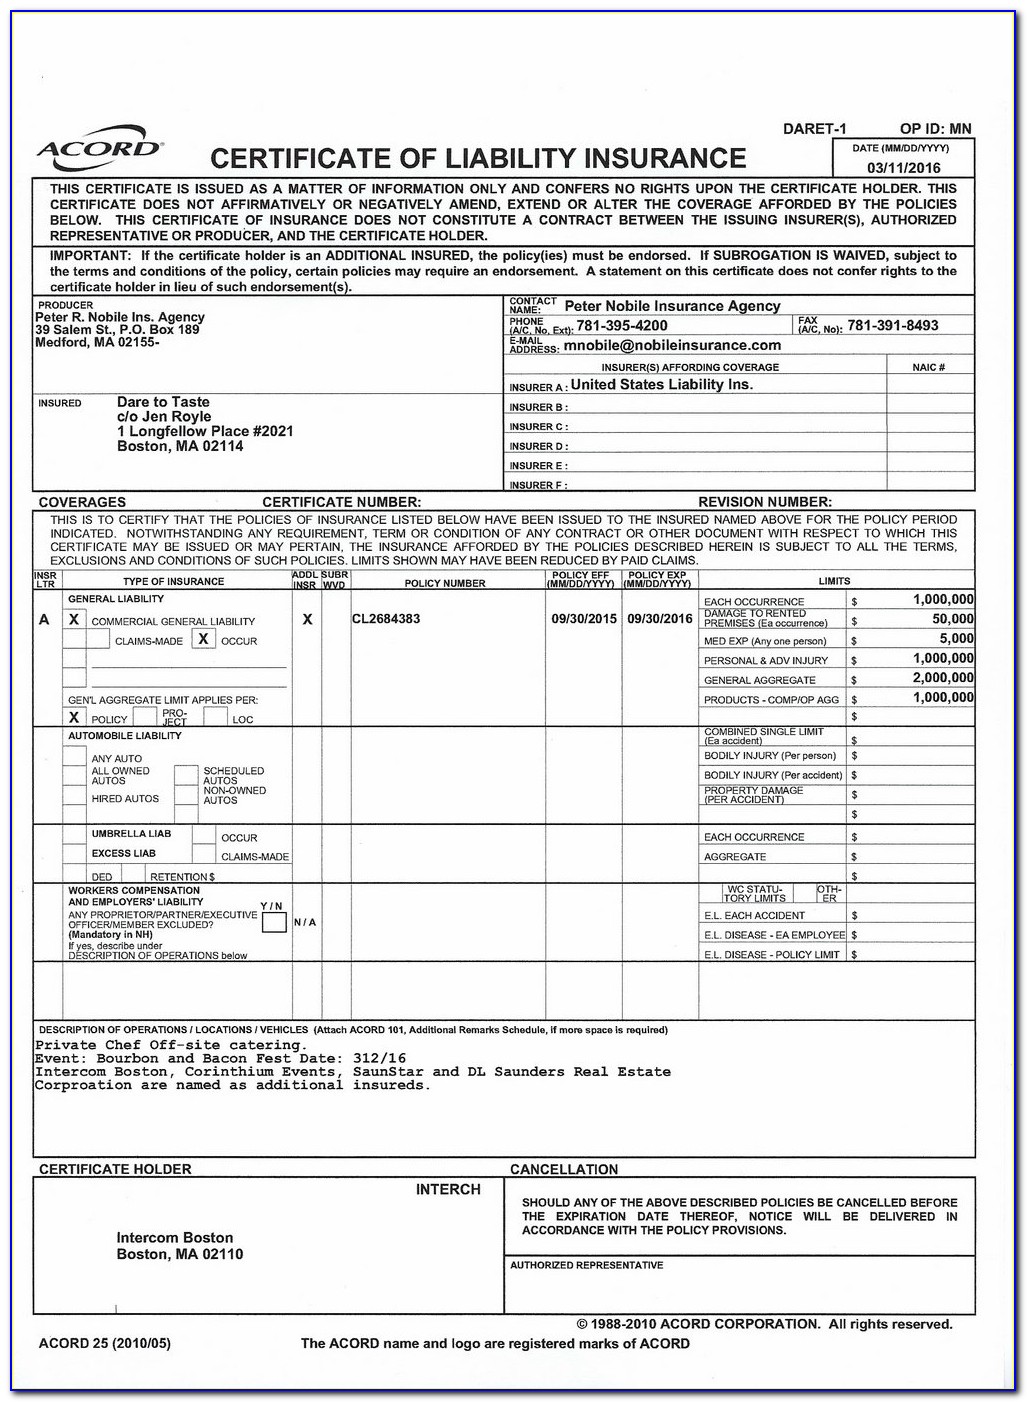 free-acord-25-fillable-forms-form-resume-examples-vx5j17ldjv